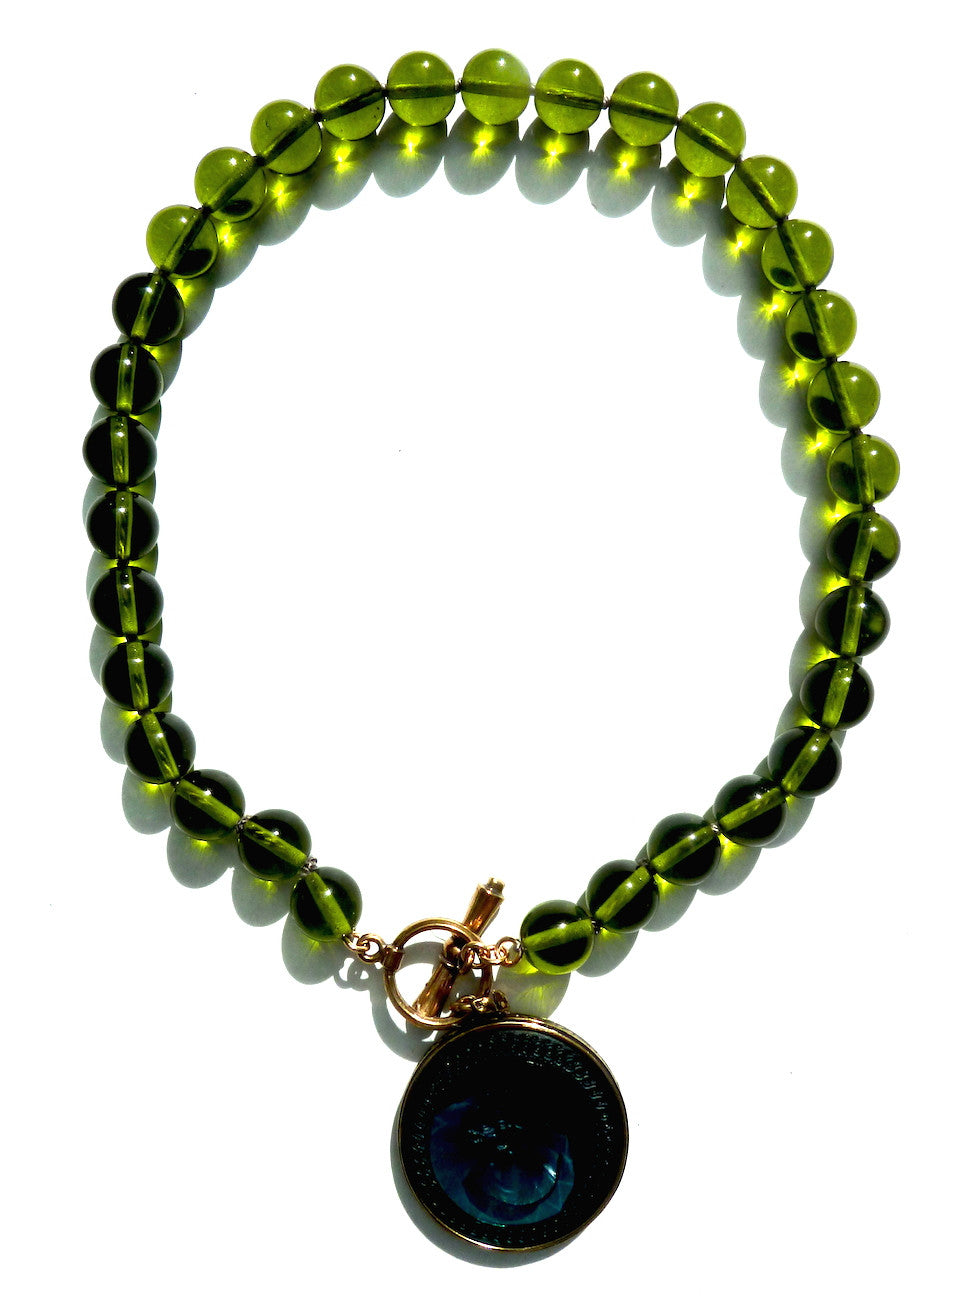 Necklace Intaglio Choker Turquoise Olive